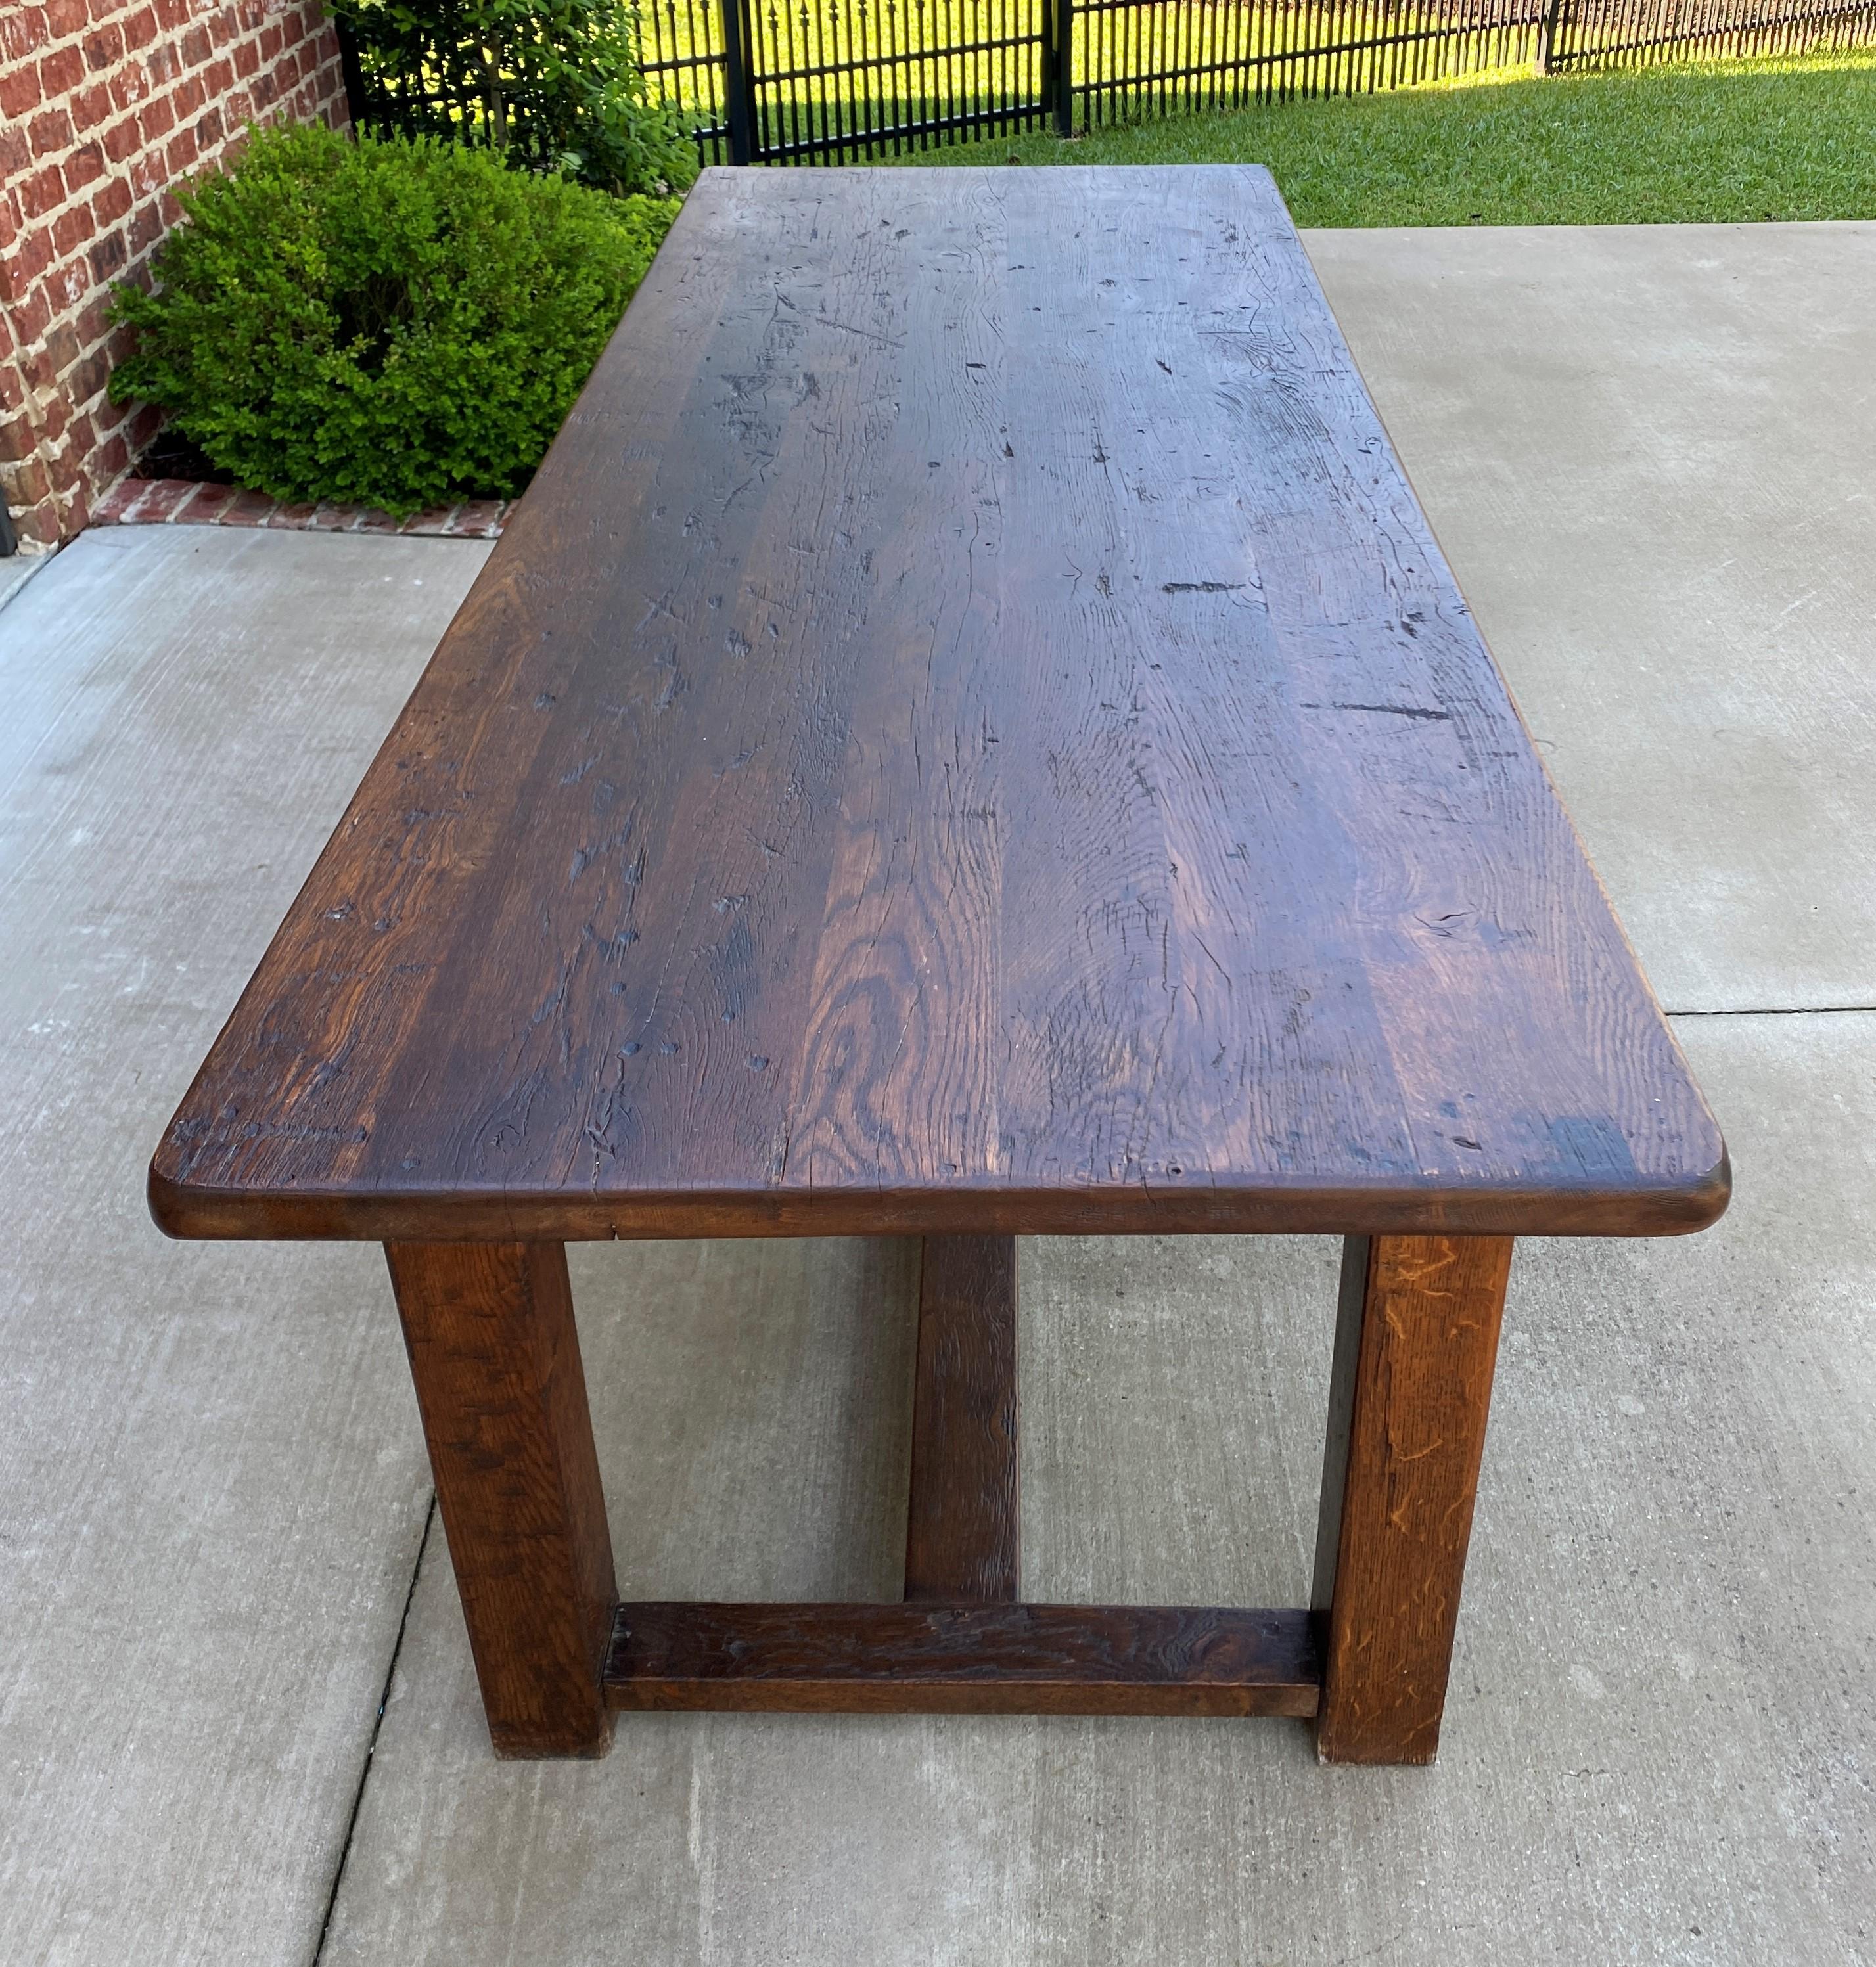 Antique French Farm Table Dining Library Table Desk Farmhouse Oak Rustic 19C 7